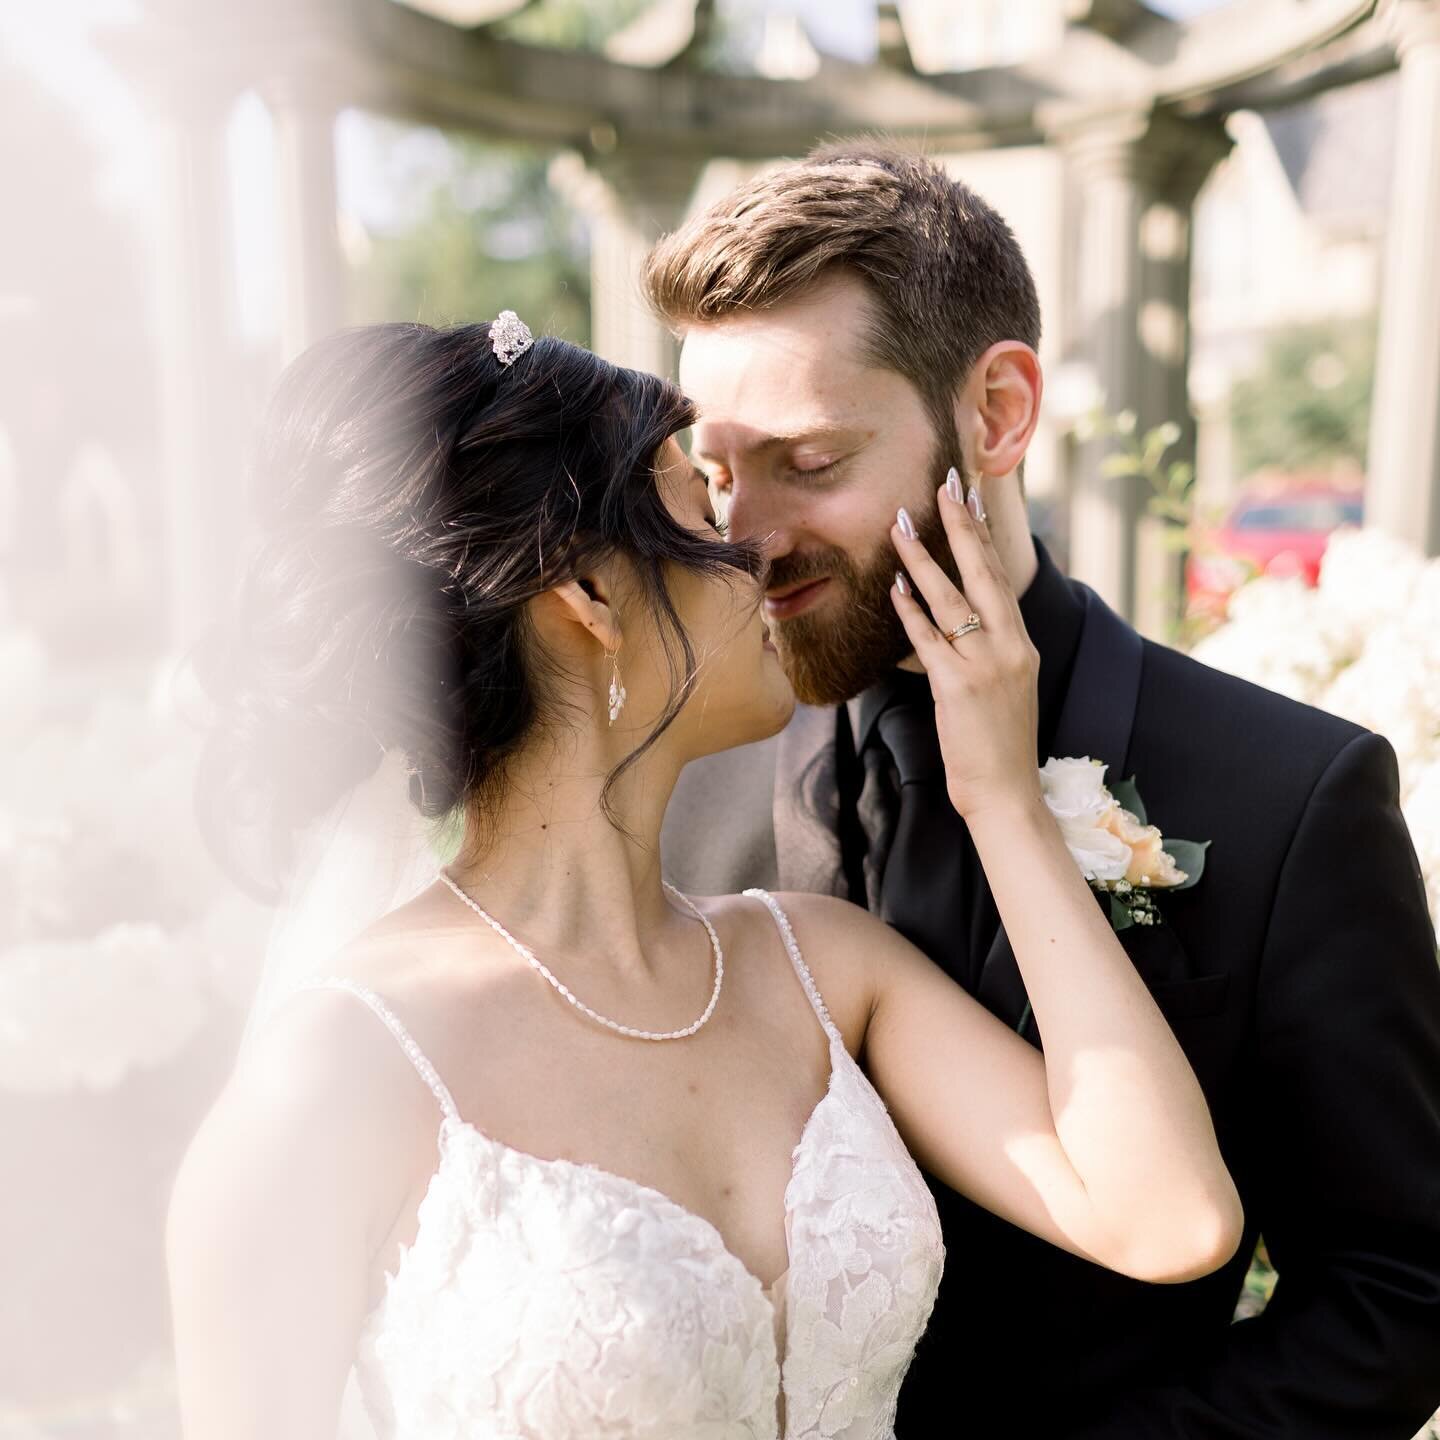 Once upon a time, in a world filled with love, two souls became one. Heidi and Justin's story is a testament to that beautiful beginning - a symphony of laughter, tears, and pure joy.